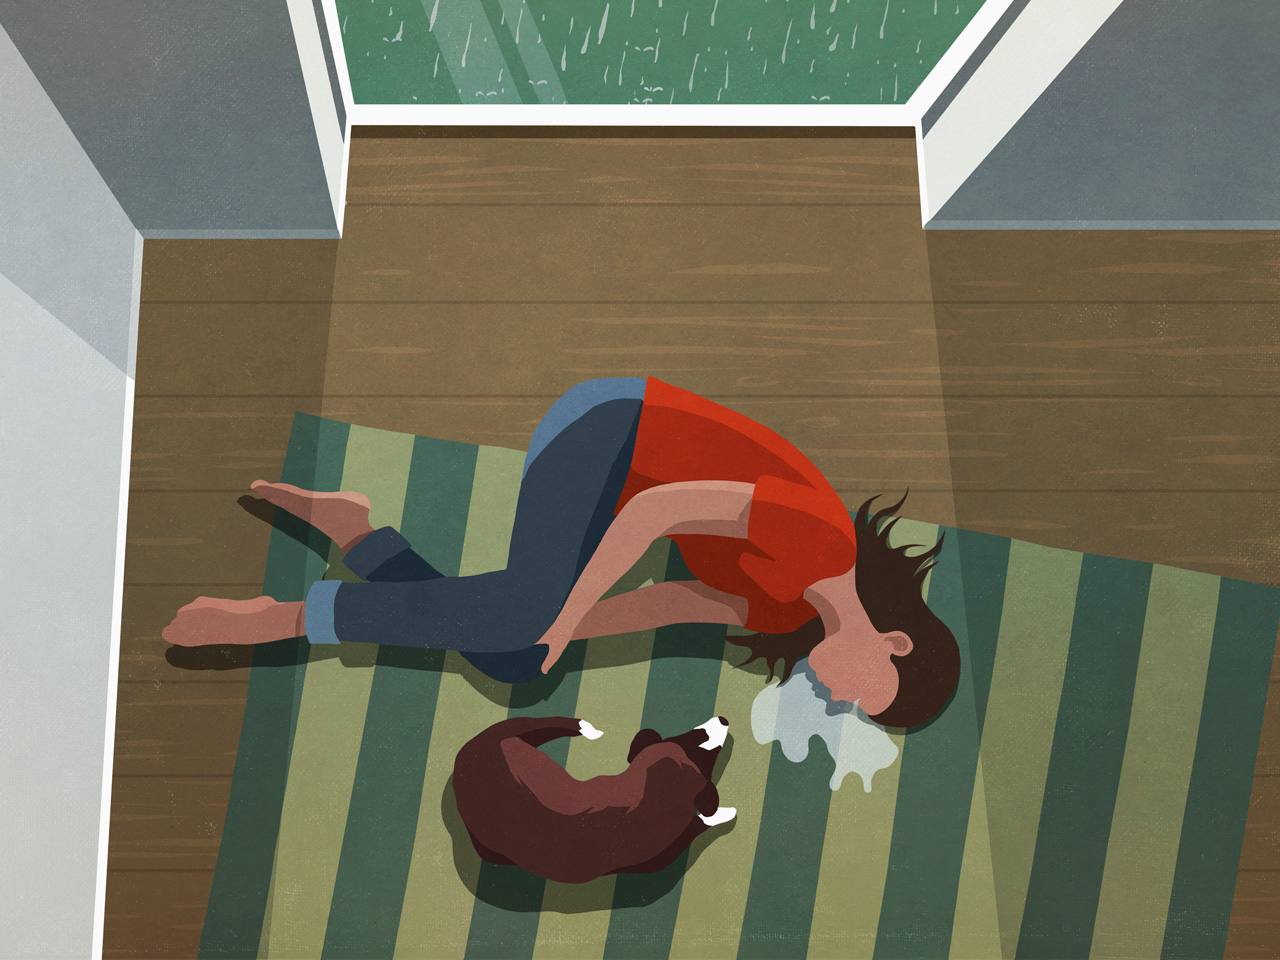 An illustration of a woman lying on the floor on a green striped carpet, crying next to her dog, representing grief over a lost pet.